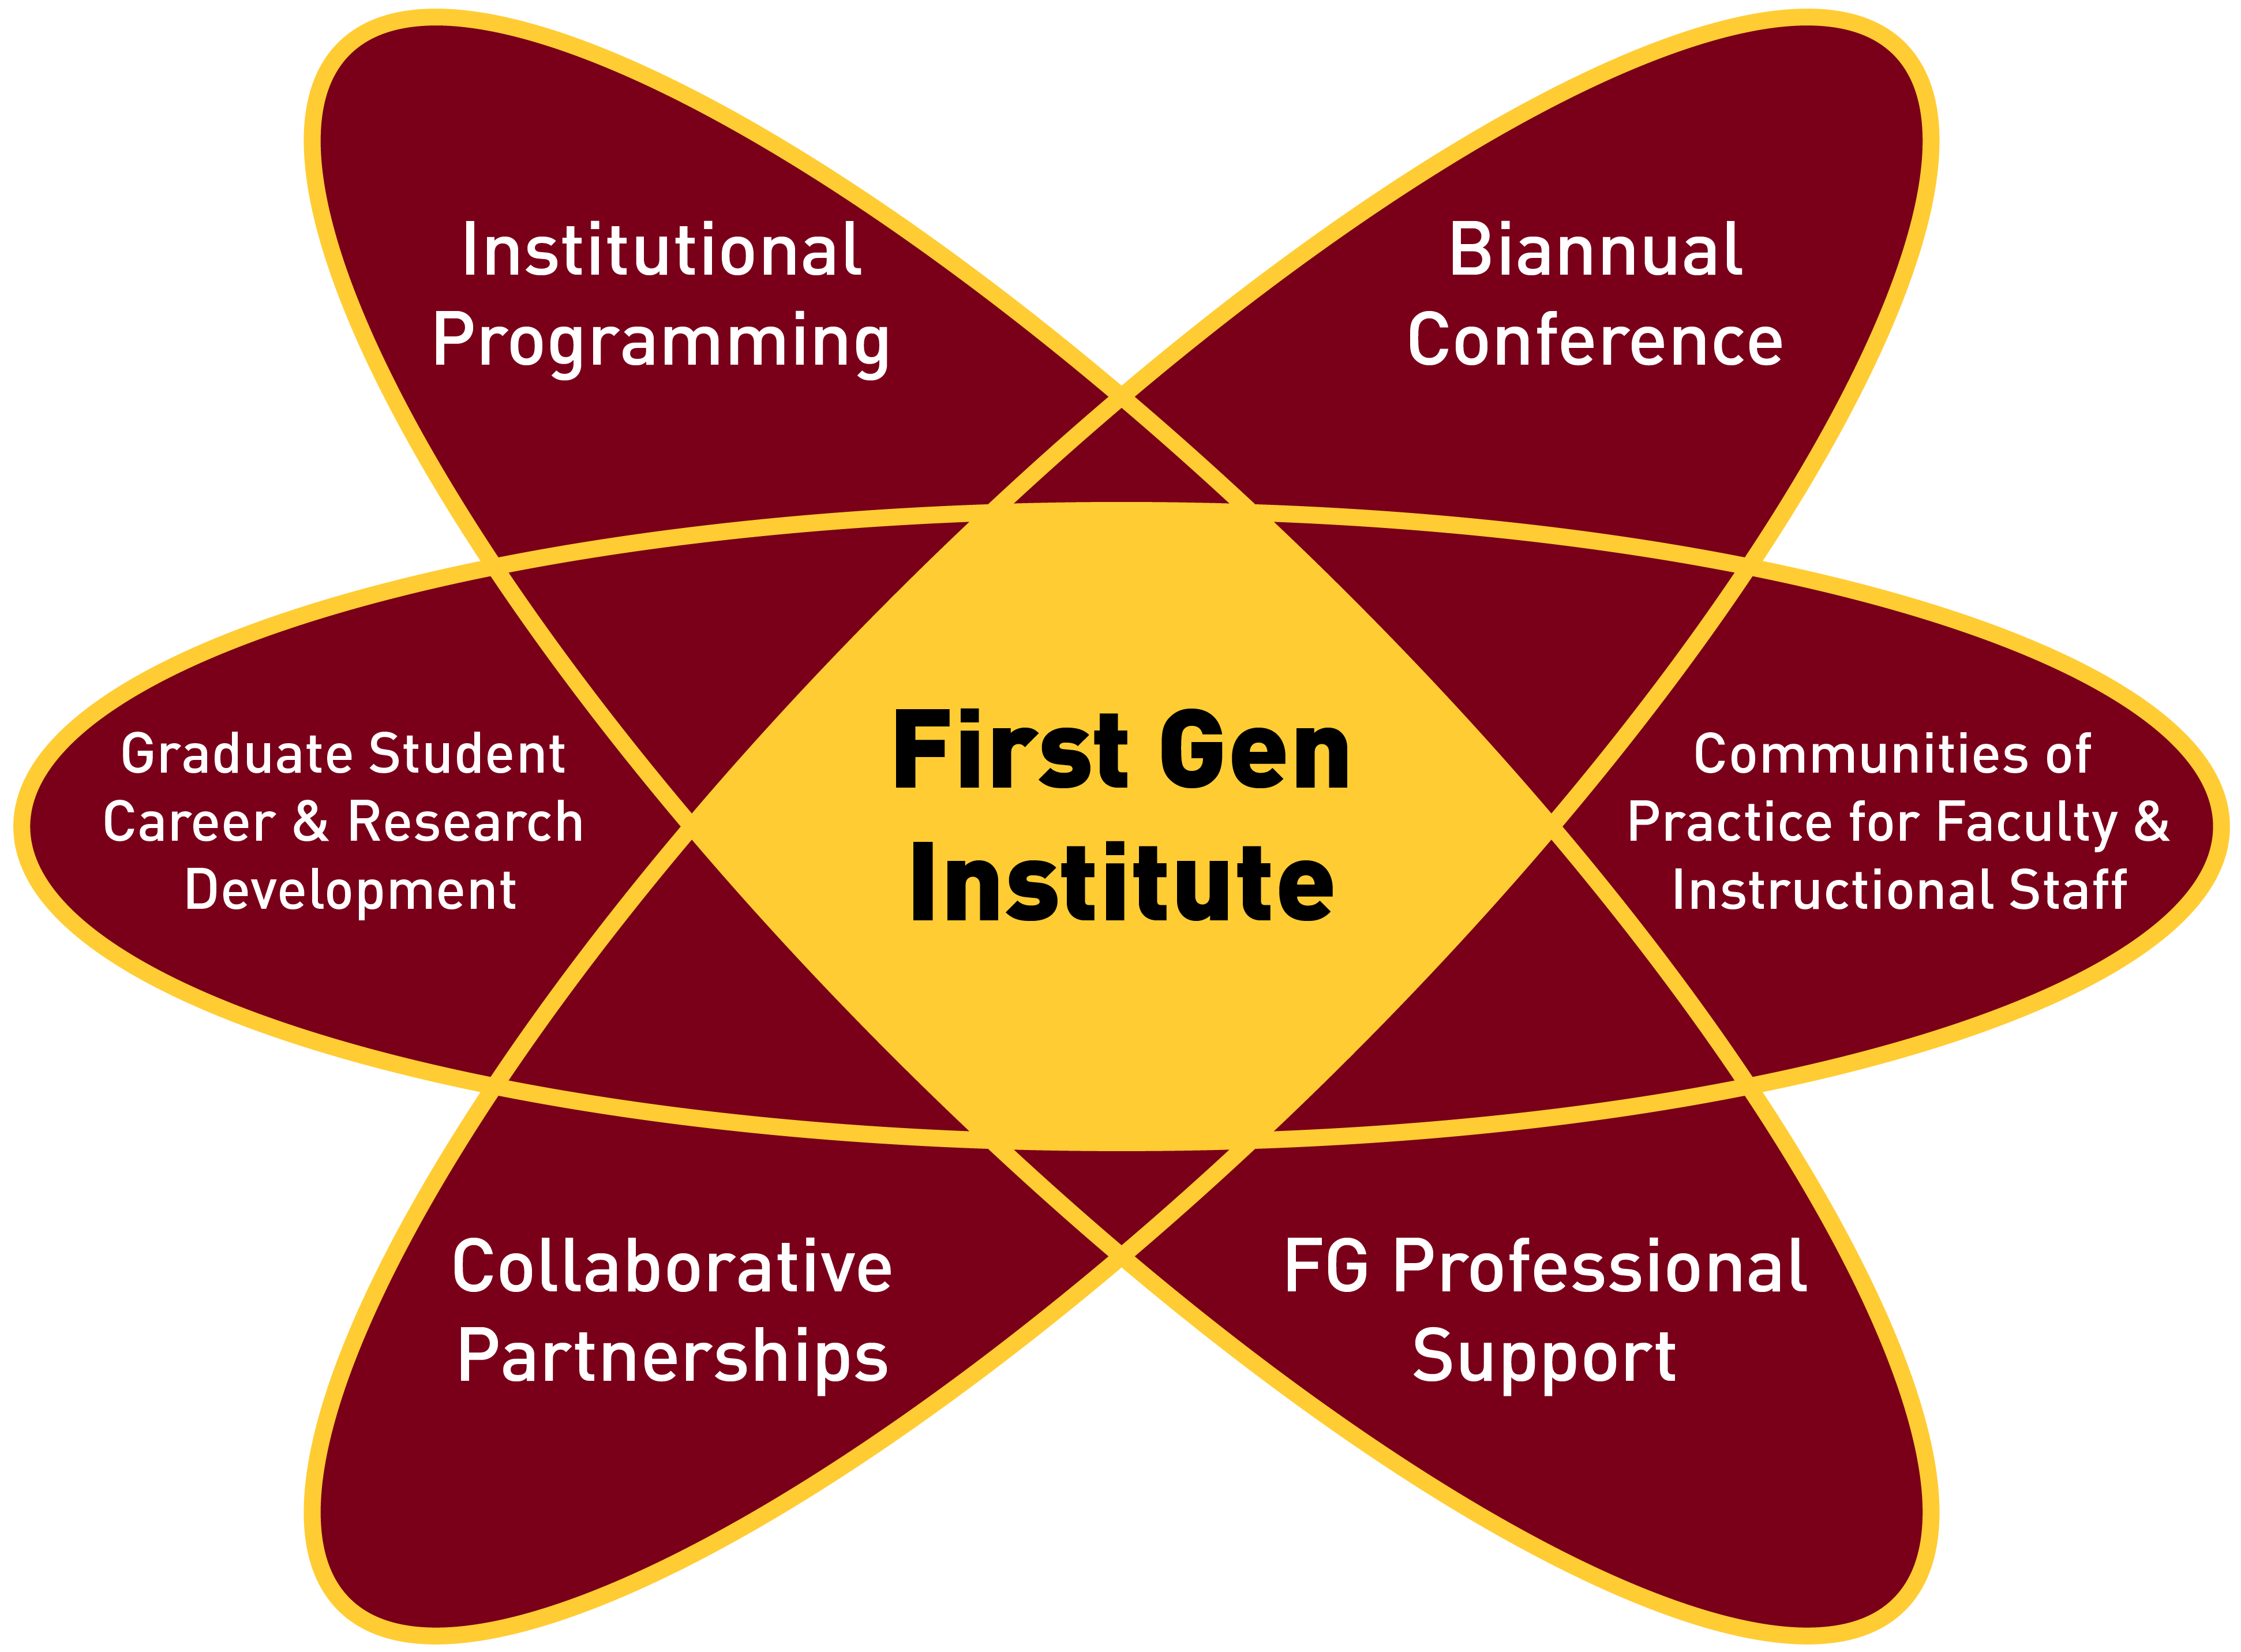 Infographic illustrating various component activity areas of the First Gen Institute: Biannual Conference, Communities of Practice for Faculty and Instructional Staff, FG Professional Support, Collaborative Partnerships, Graduate Student Career and Research Development, and Instutional Programming.